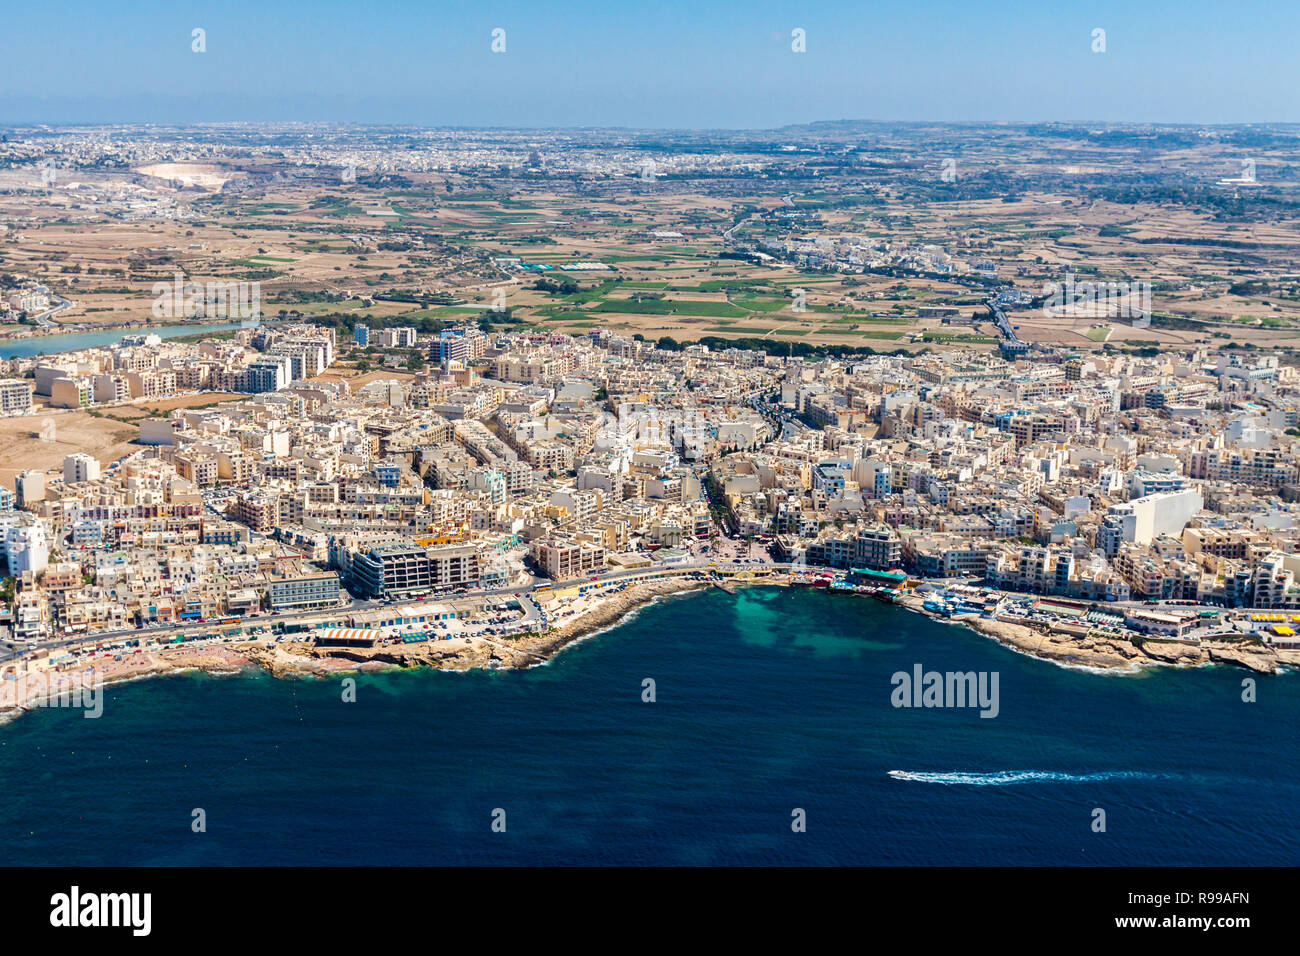 Aerial view of Bugibba town, St. Paul's Bay in the Northern Region, Malta. Popular tourist resort destination with promenade, hotels, restaurants, pubs, clubs, and a casino. Stock Photo